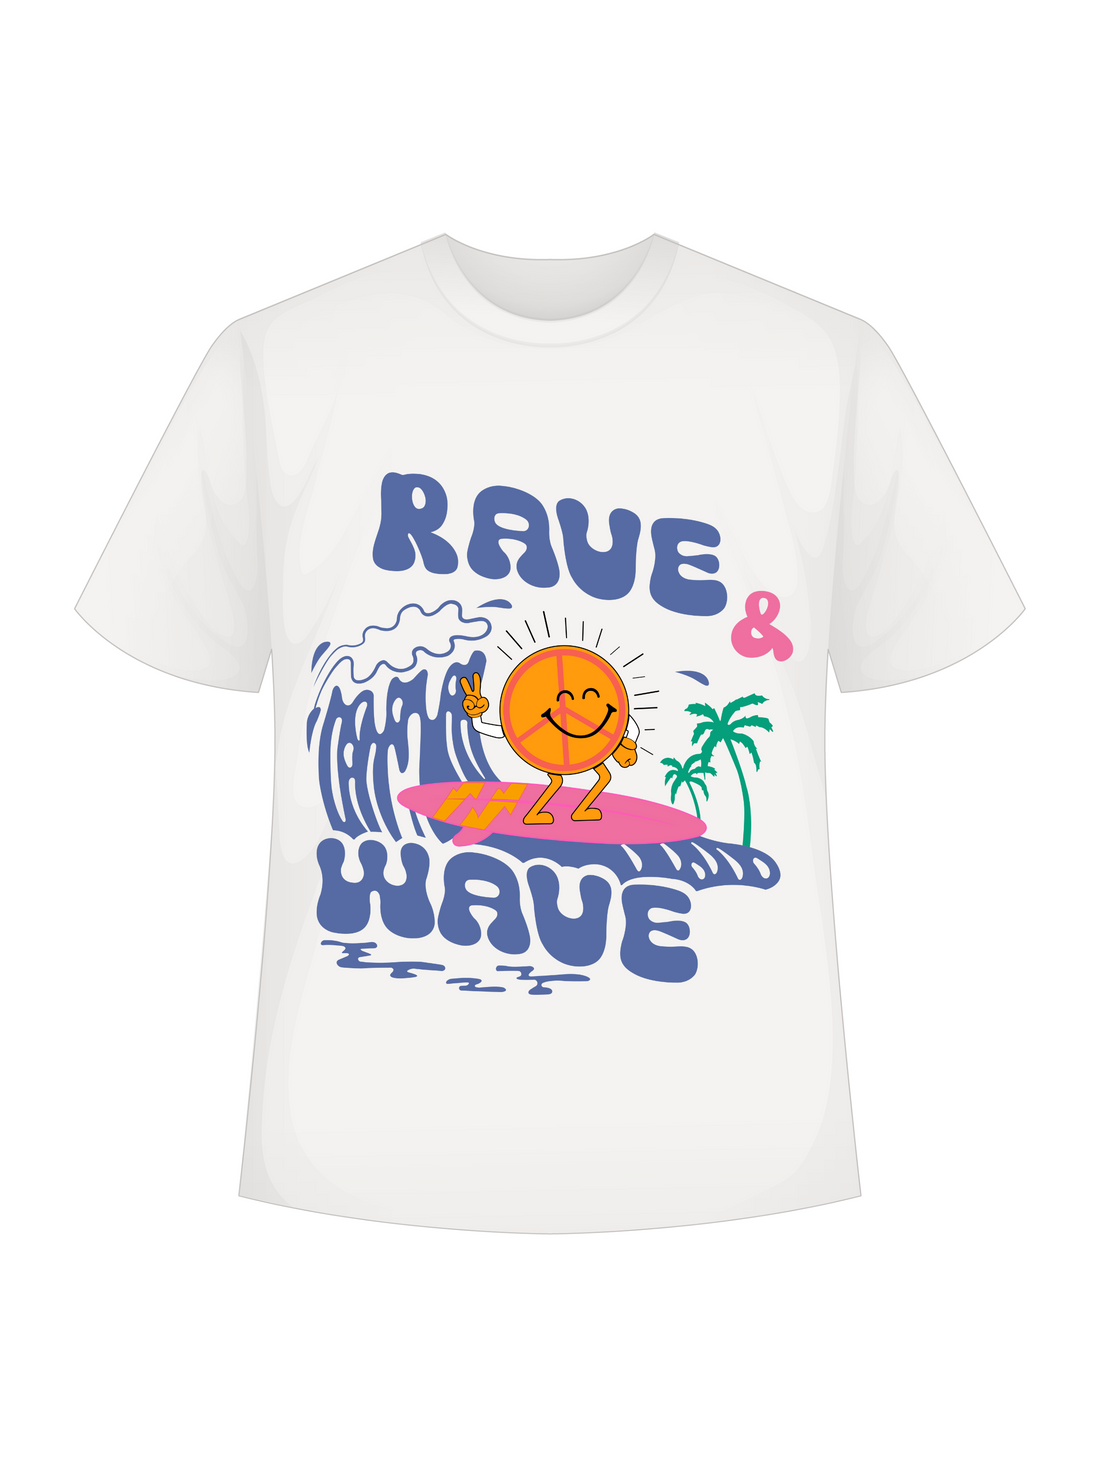 Rave & Wave Regular  Tee   For Men and Women